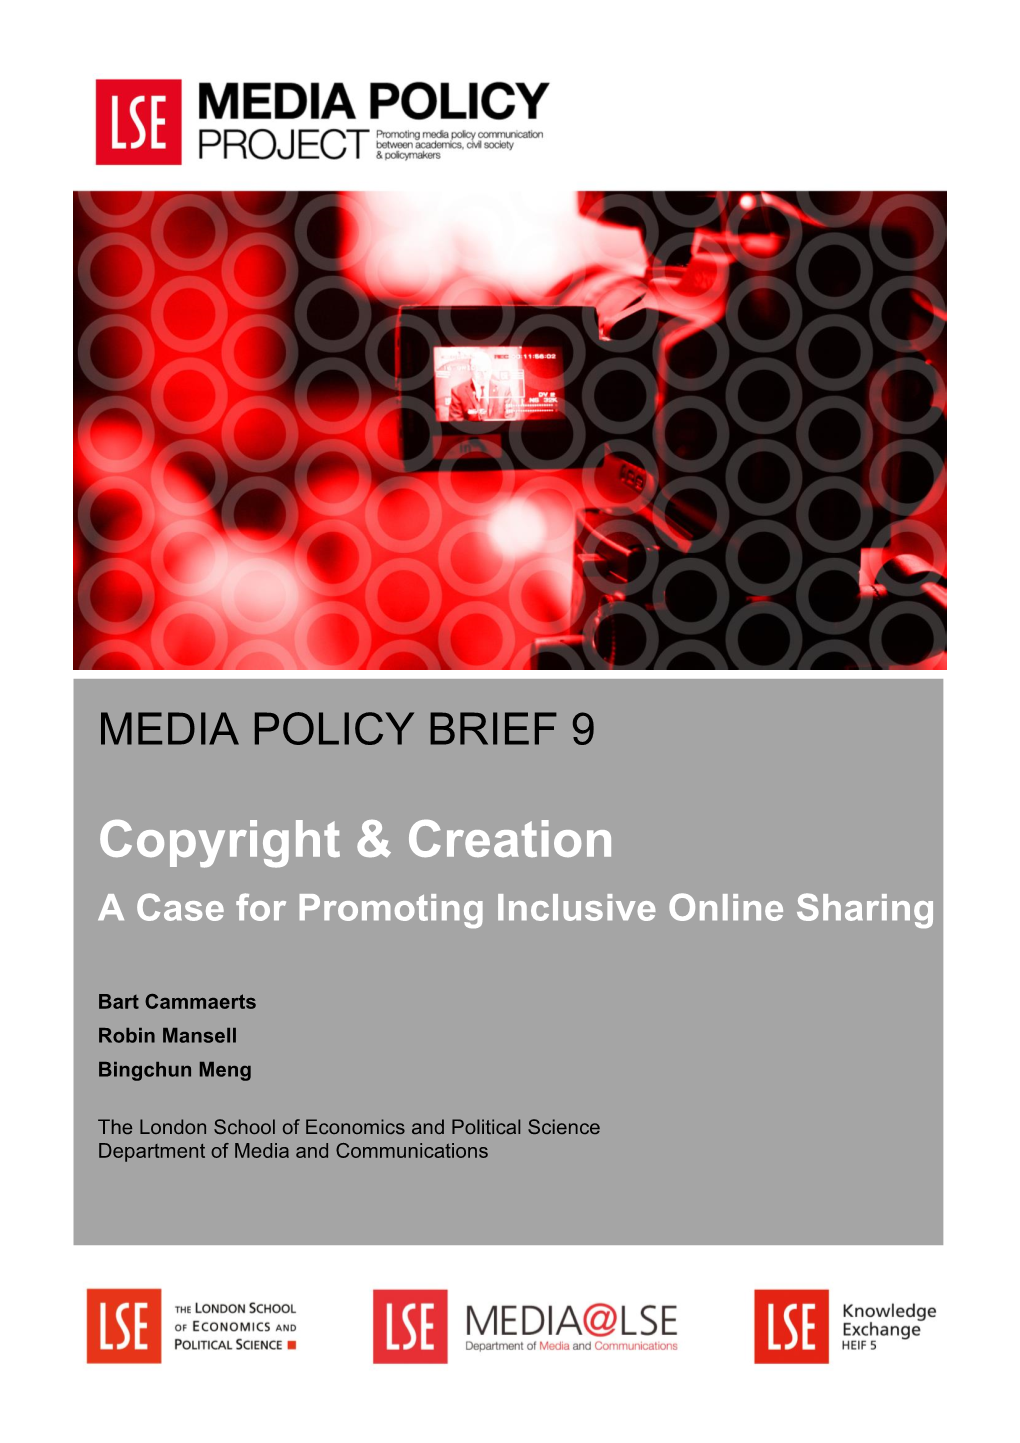 LSE MPP Policy Brief 9 Copyright and Creation Revised